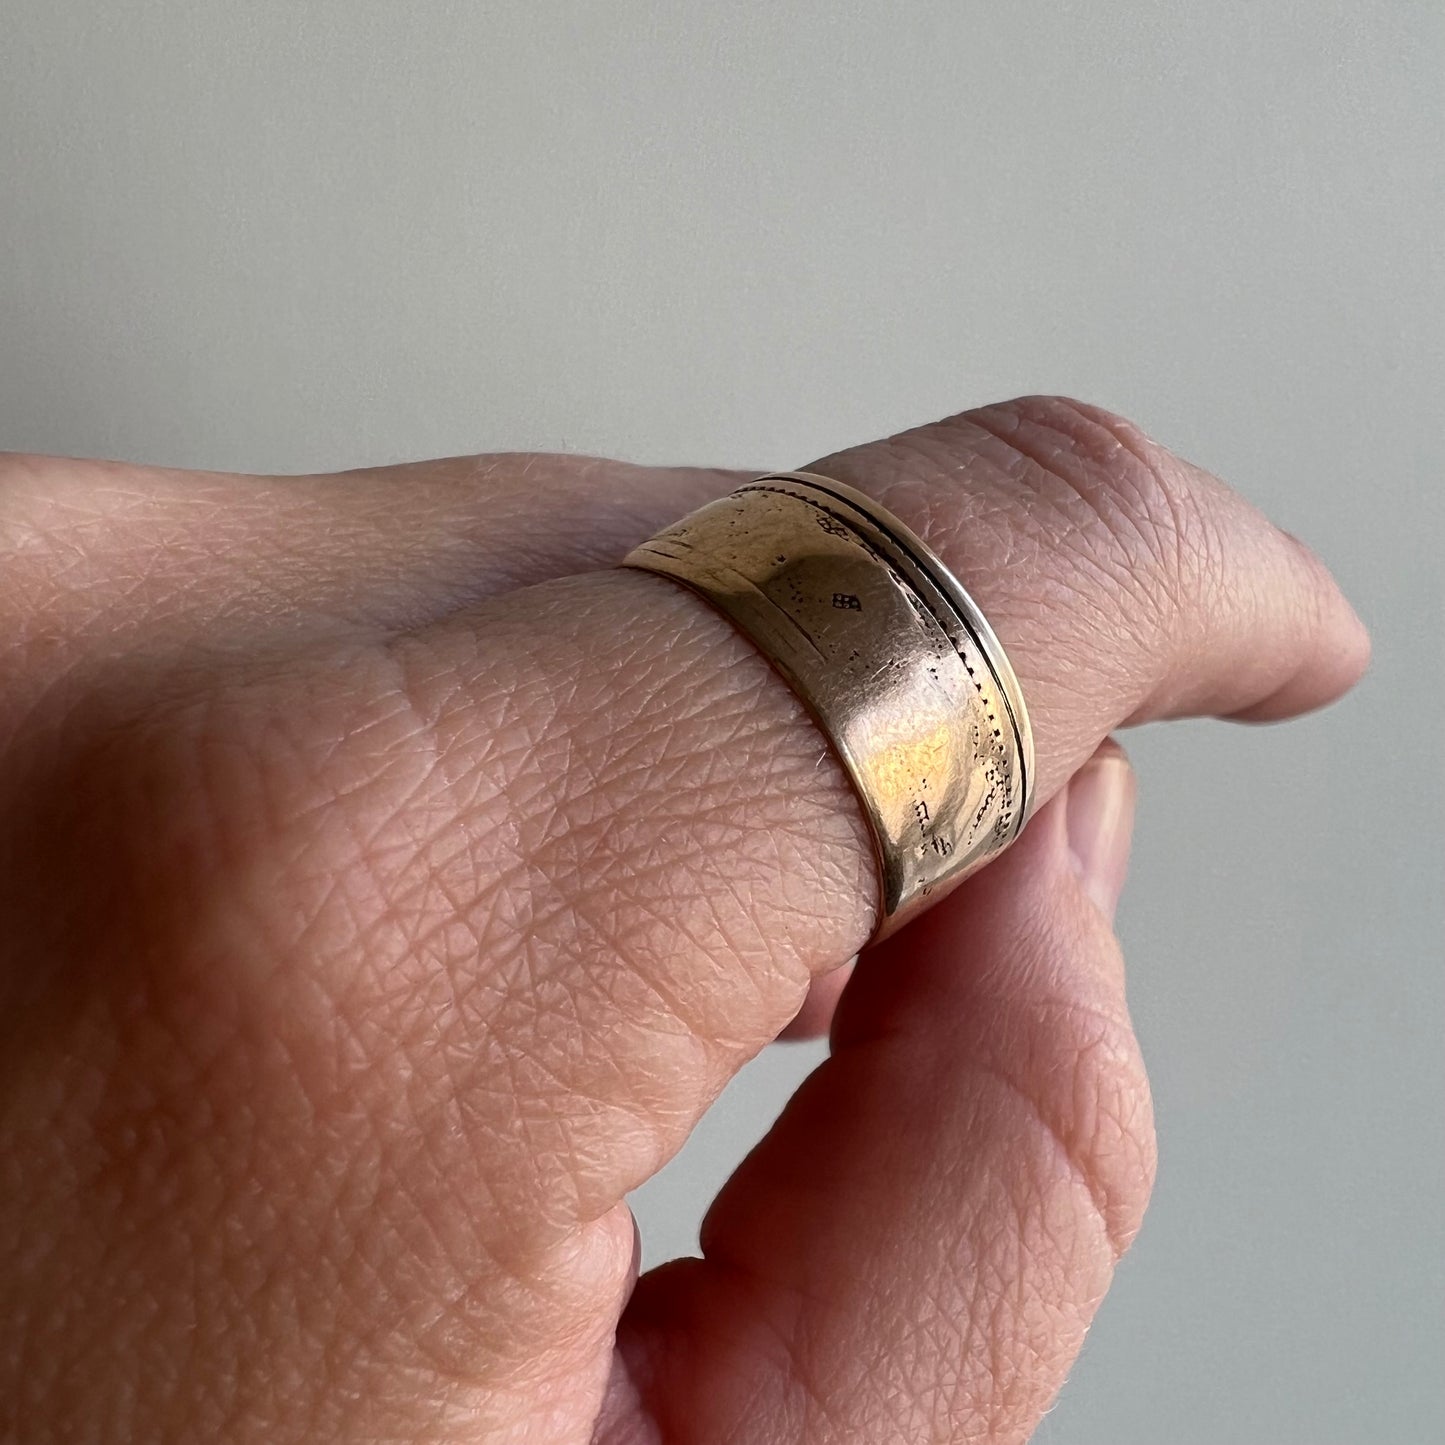 A N T I Q U E // seasons past / 10k rosy yellow gold wide band / size 8 to 8.25 but fits smaller because it's 9mm wide